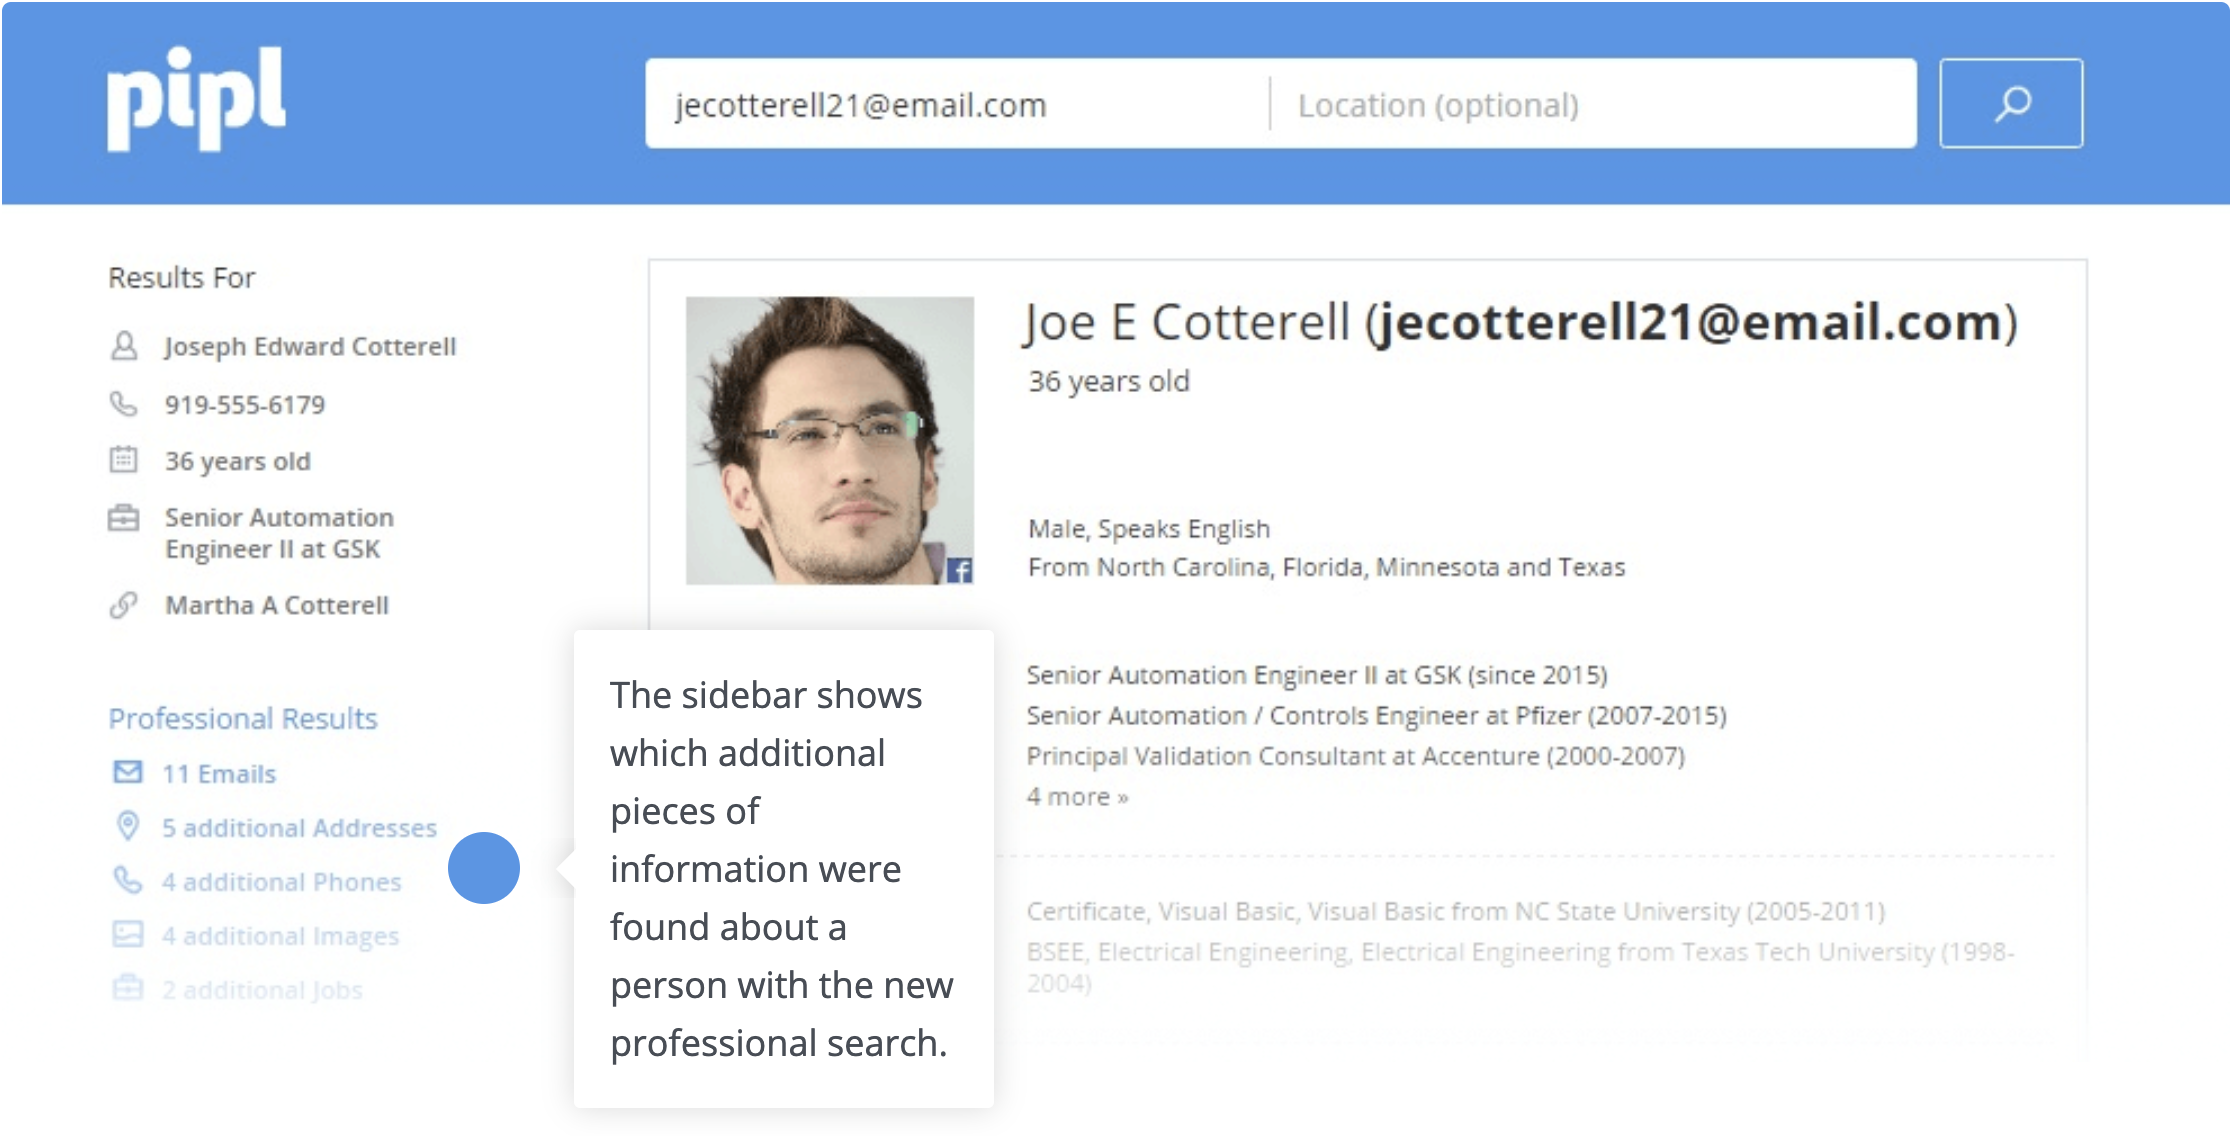 The sidebar shows which additional pieces of information were found about a person with the new professional search